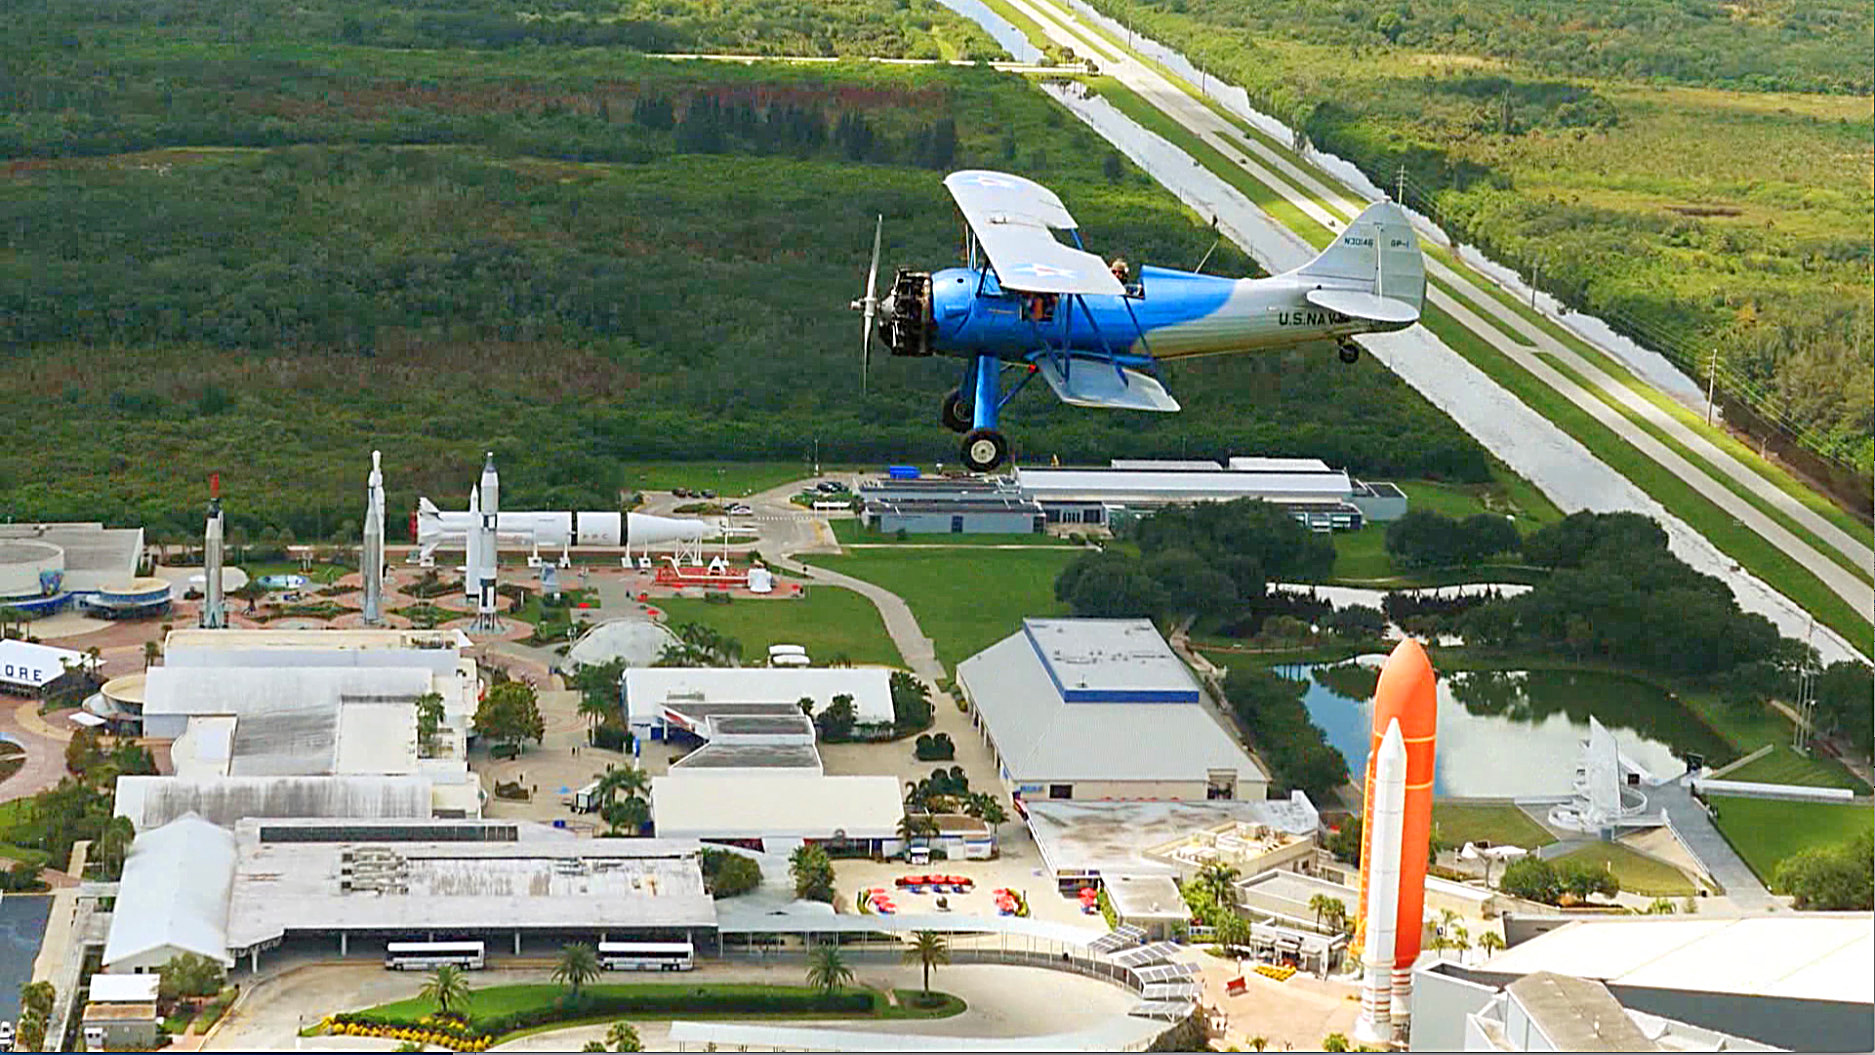 Florida Air Tour Biplane flies over Kennedy Space Center Visitor Complex